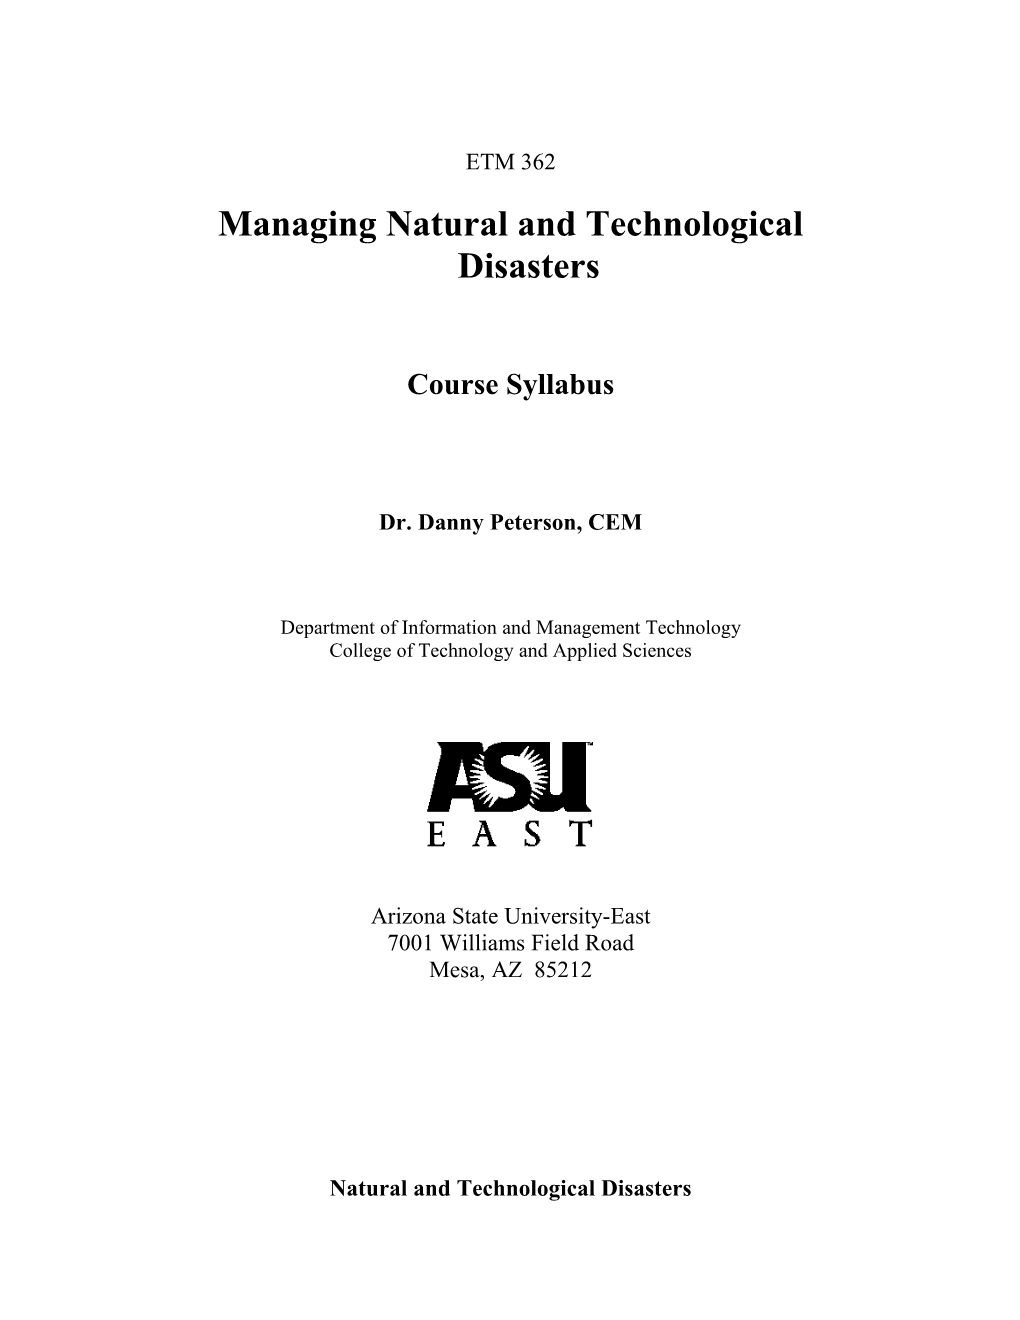 Managing Natural and Technological Disasters